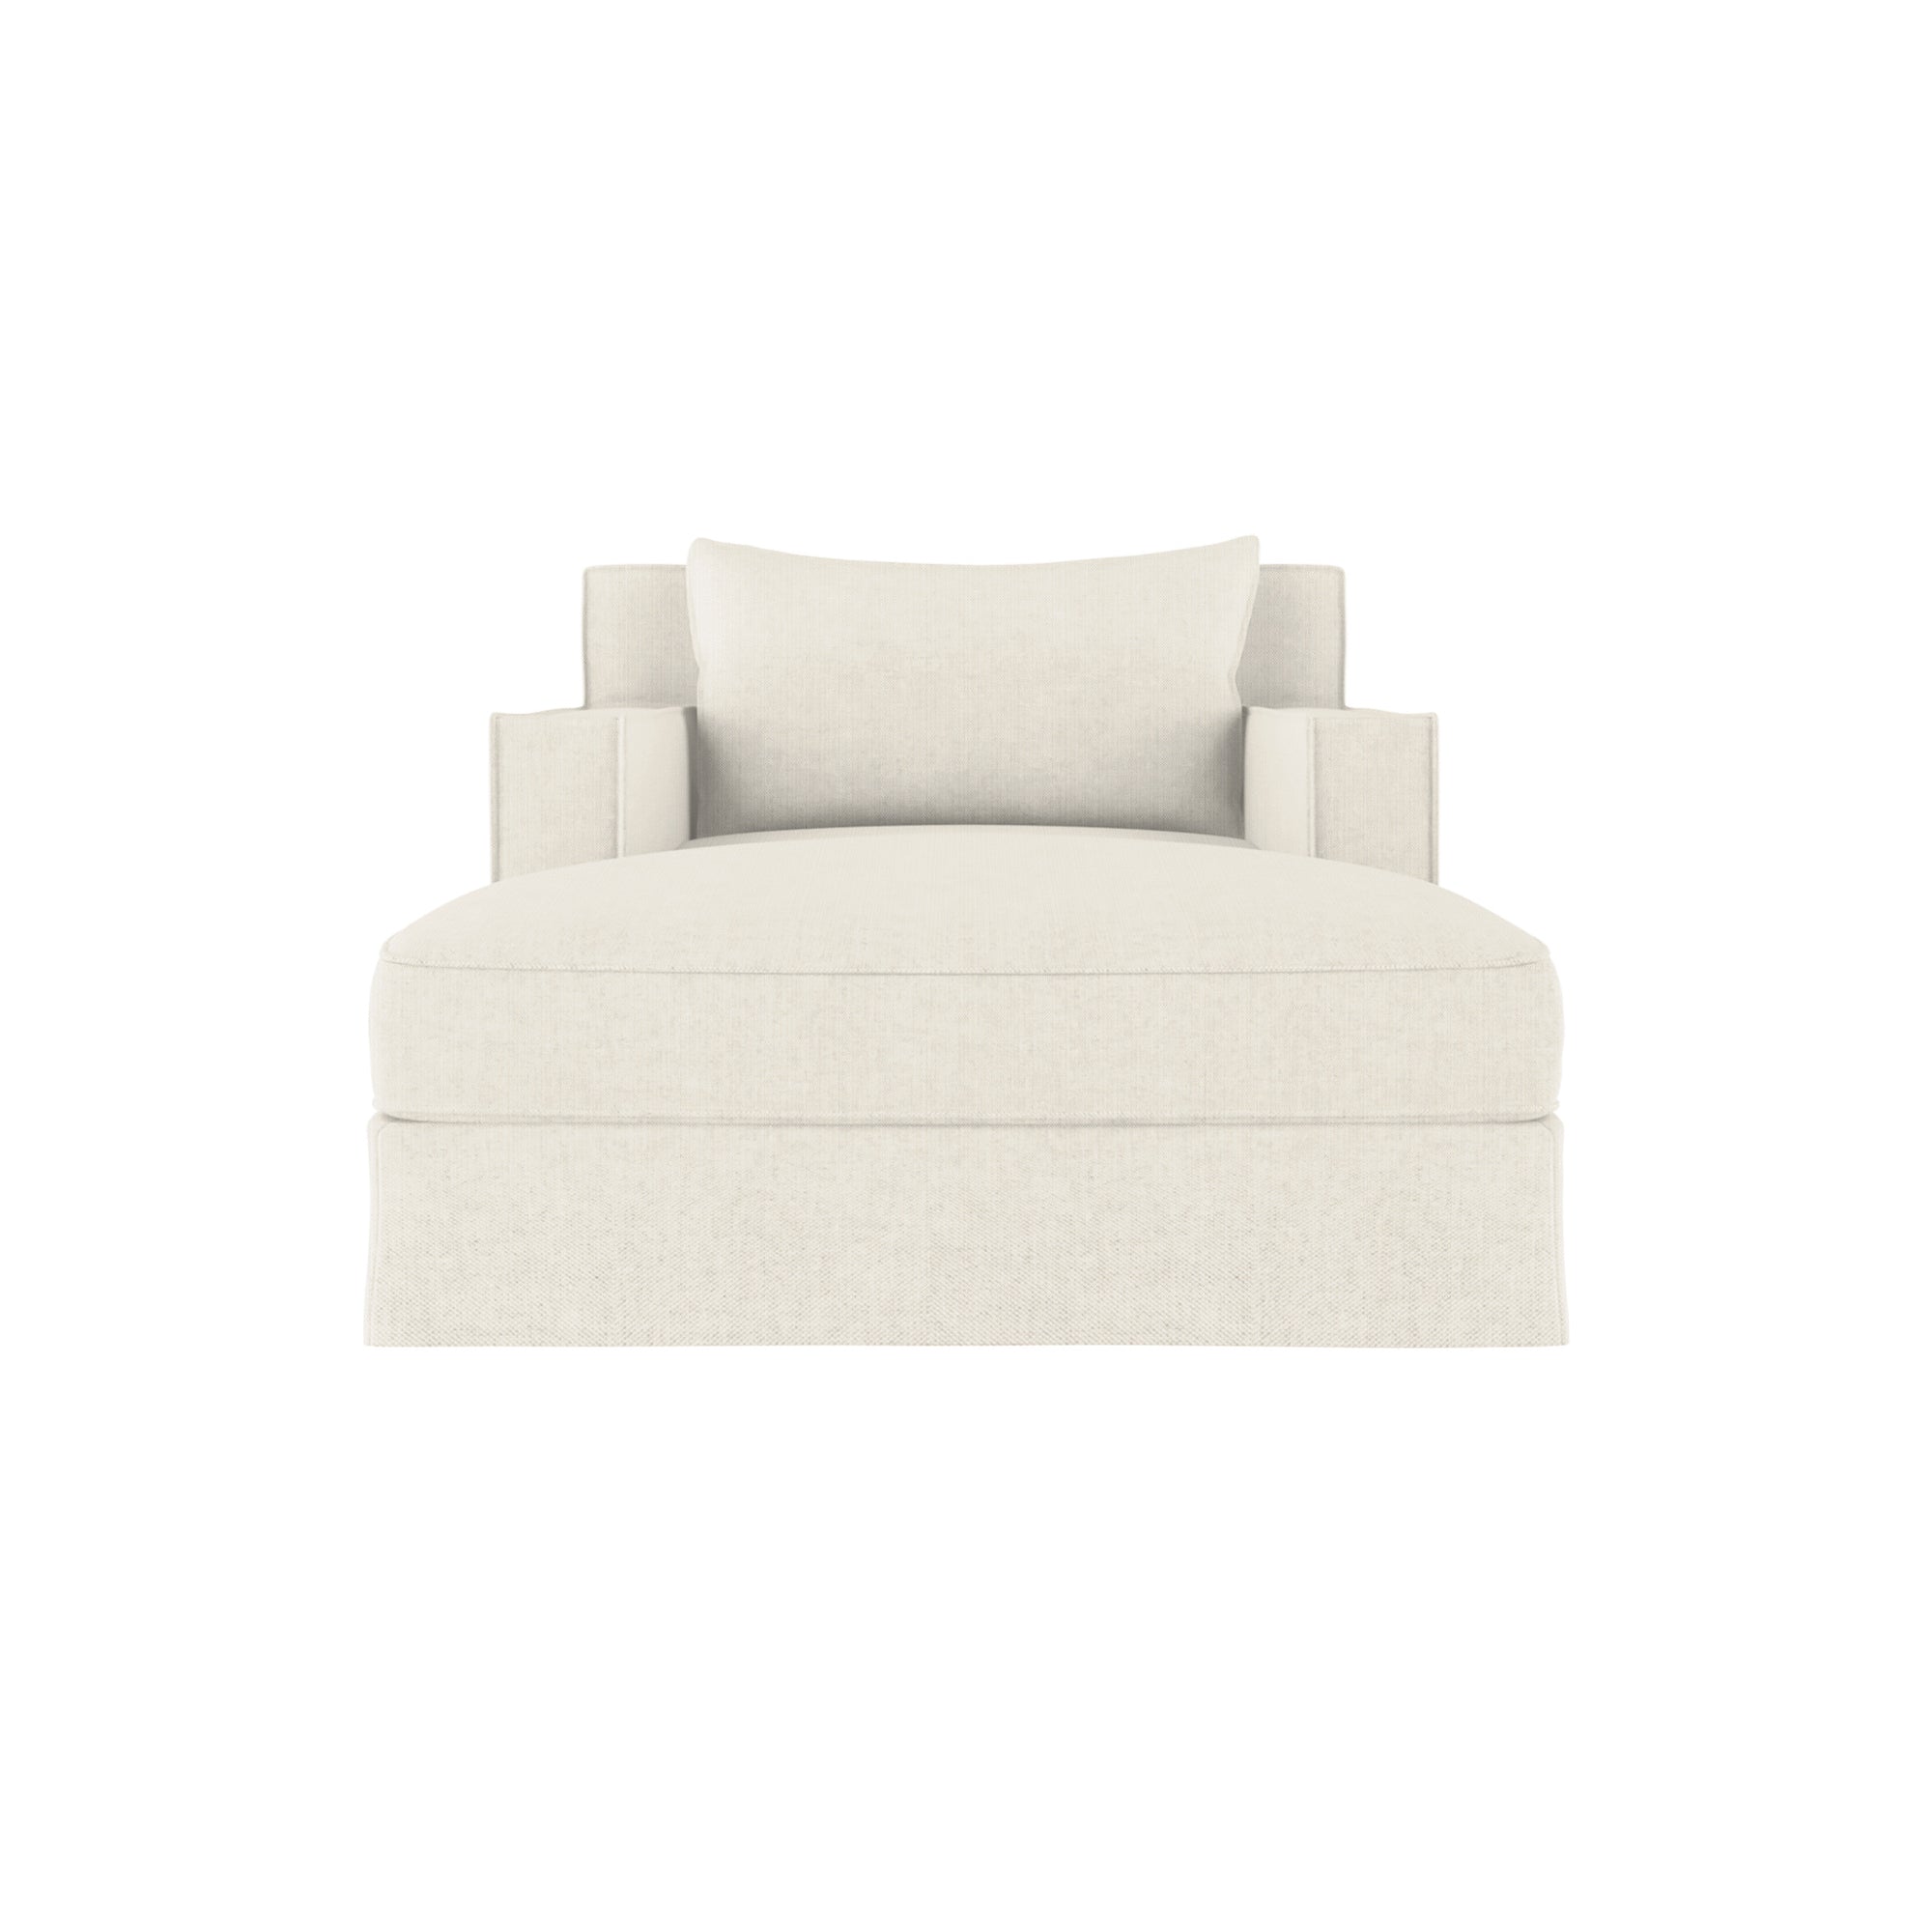 Mulberry Chaise - Alabaster Box Weave Linen